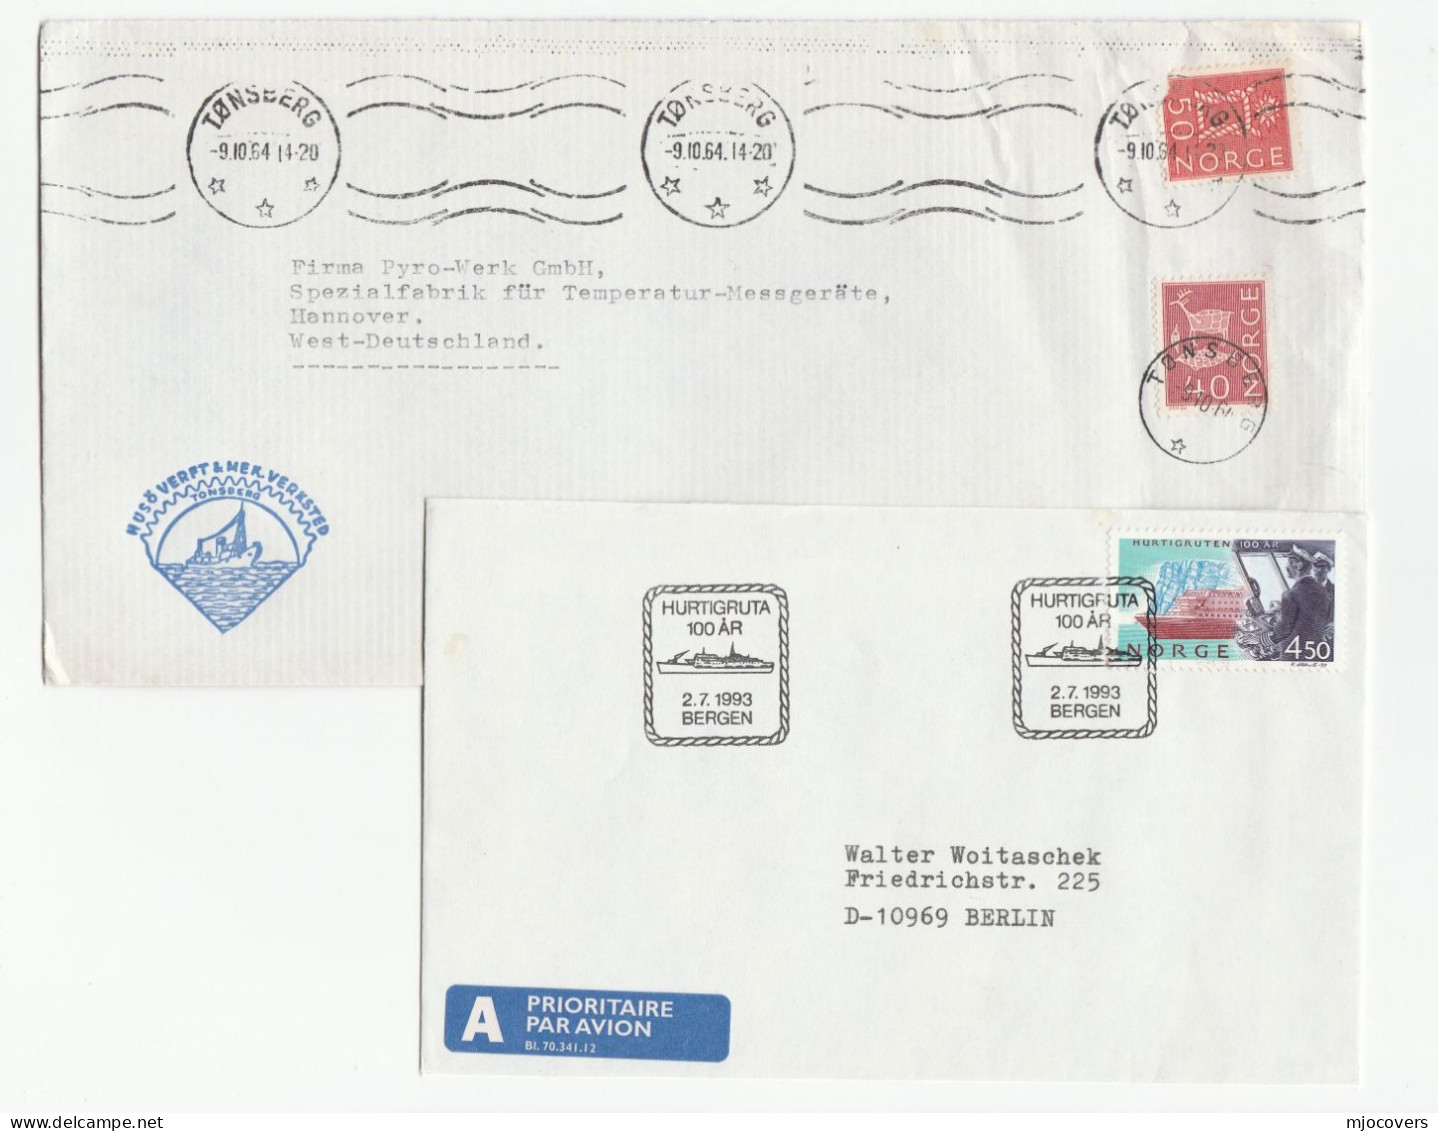 SHIPS  1964 - 2000  Norway 3 COVERS Cover Postcard Stamps Ship - Covers & Documents